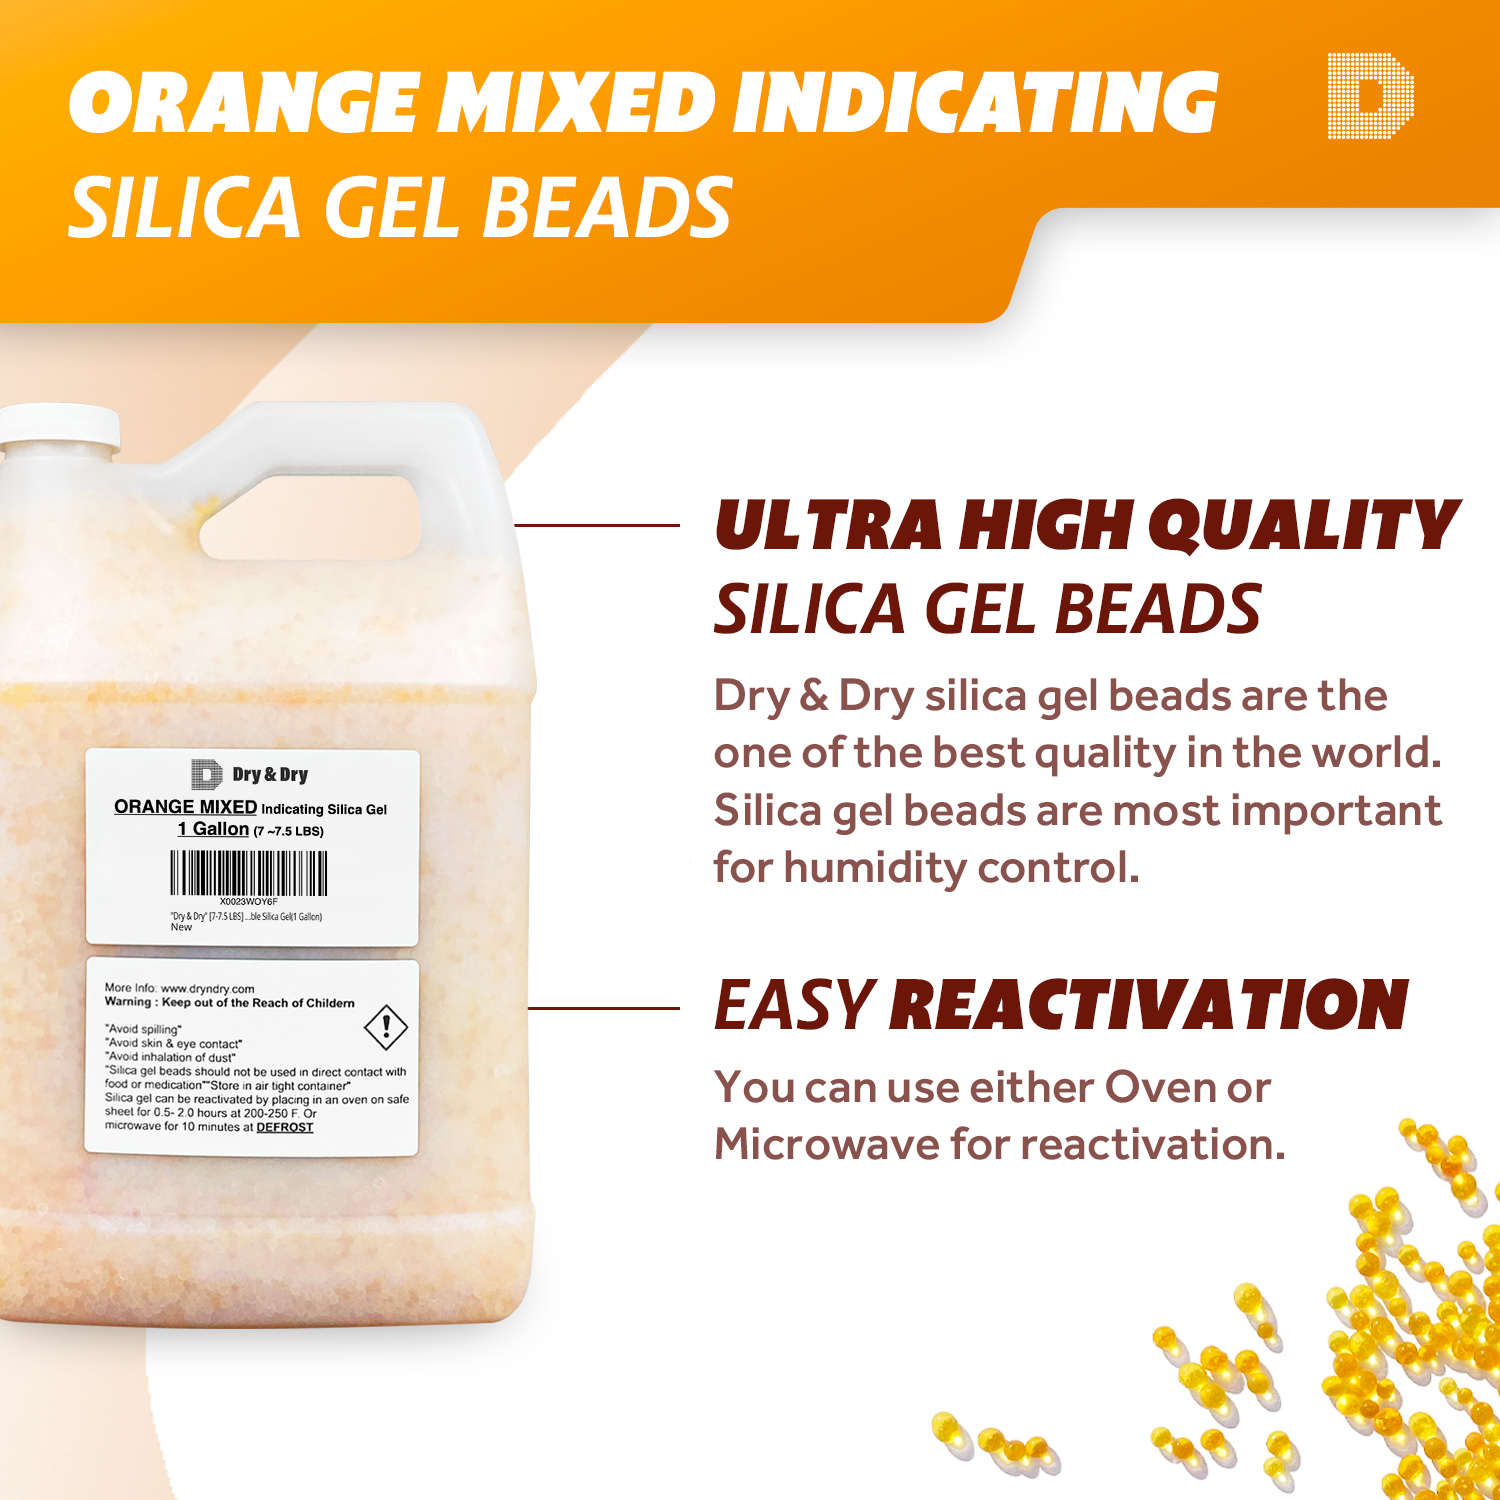 2 Gallon(14-15 LBS) "Dry & Dry" Premium Orange & White Mixed Indicating Silica Gel Desiccant Beads(Industry Standard 3-5 mm) - Rechargeable